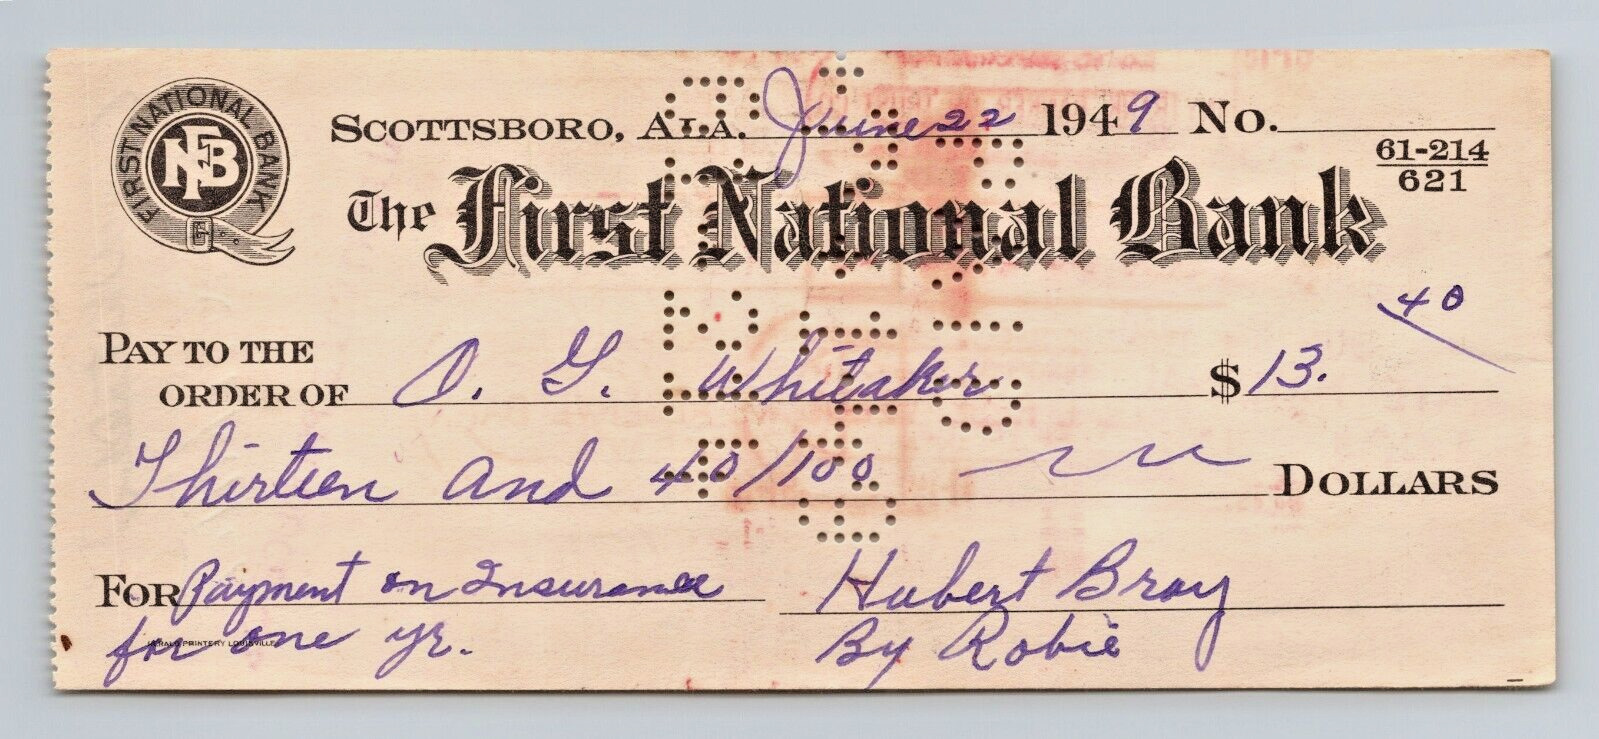 Vintage 1949 cancelled check THE FIRST NATIONAL BANK, Scottsboro,  Alabama